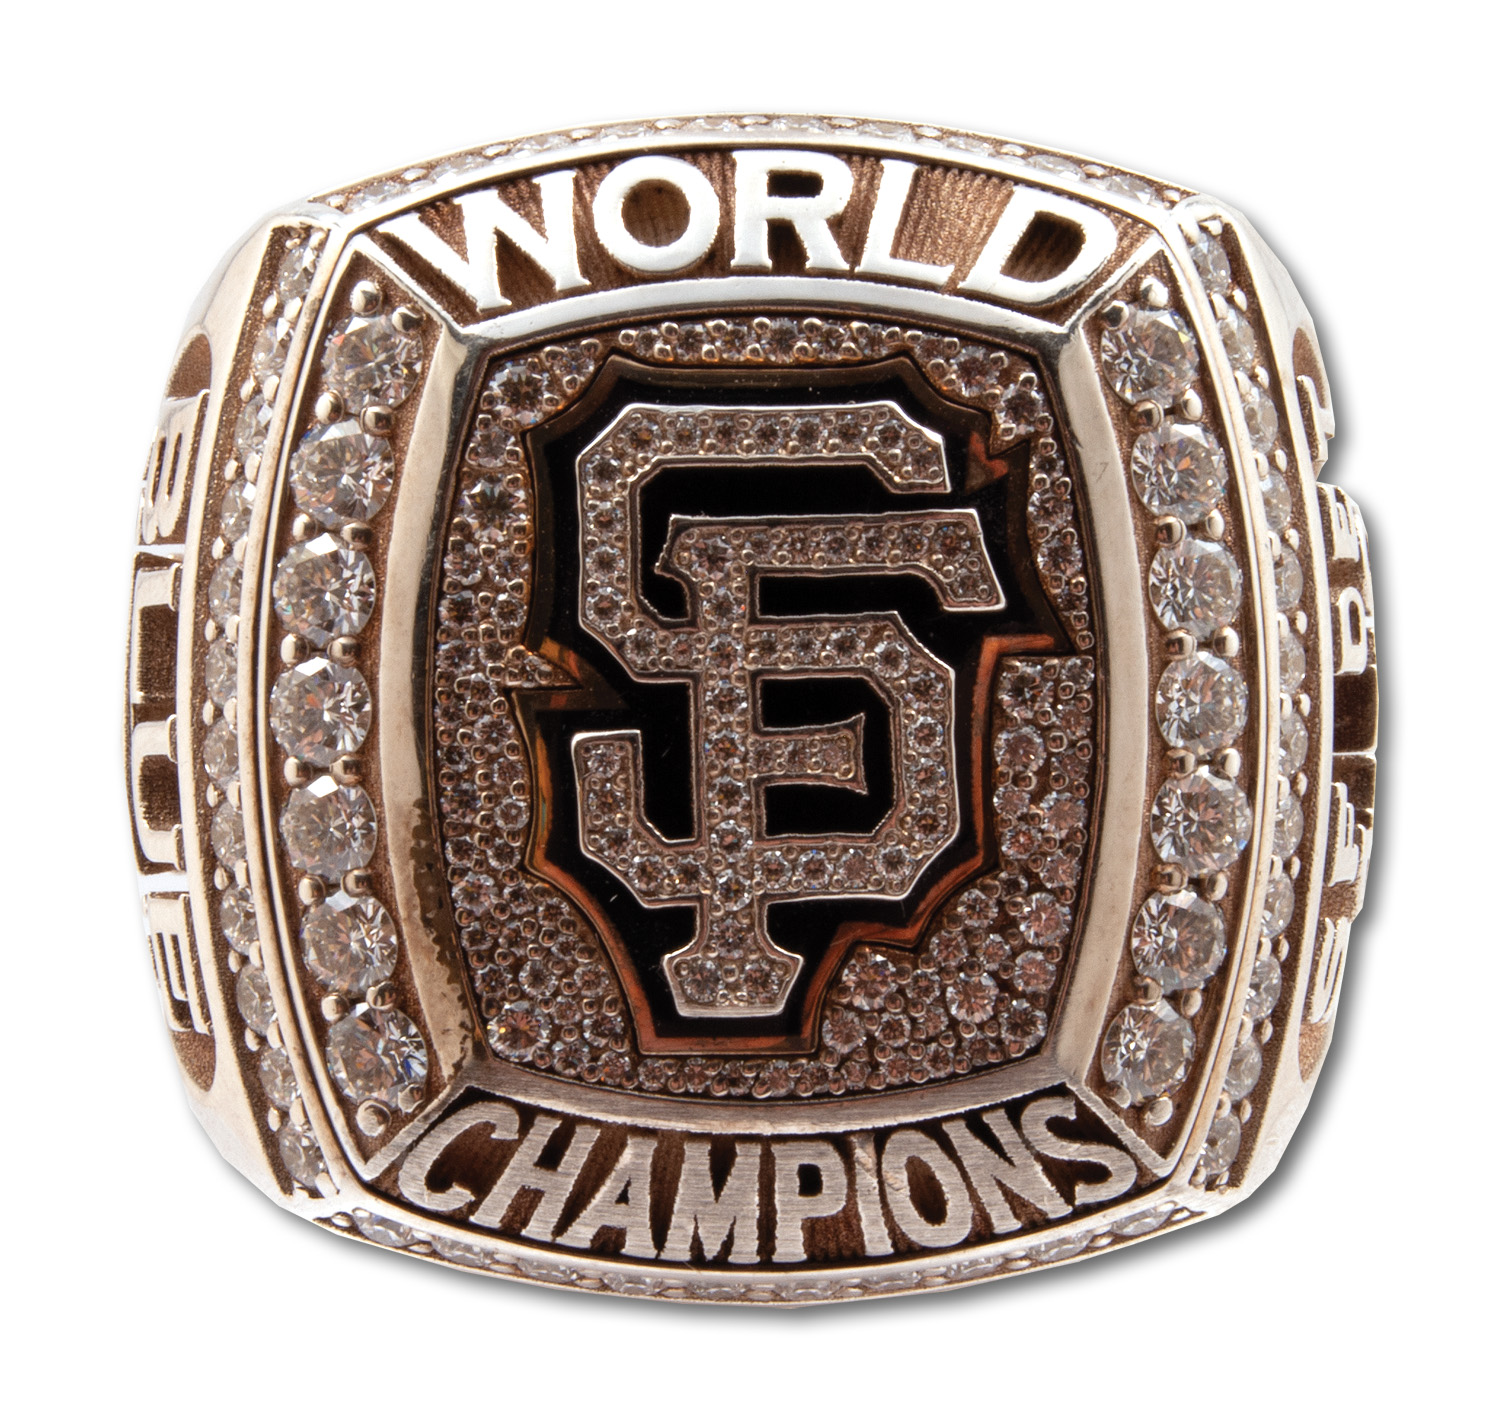 San Francisco Giants' 2012 World Series champion team honored at